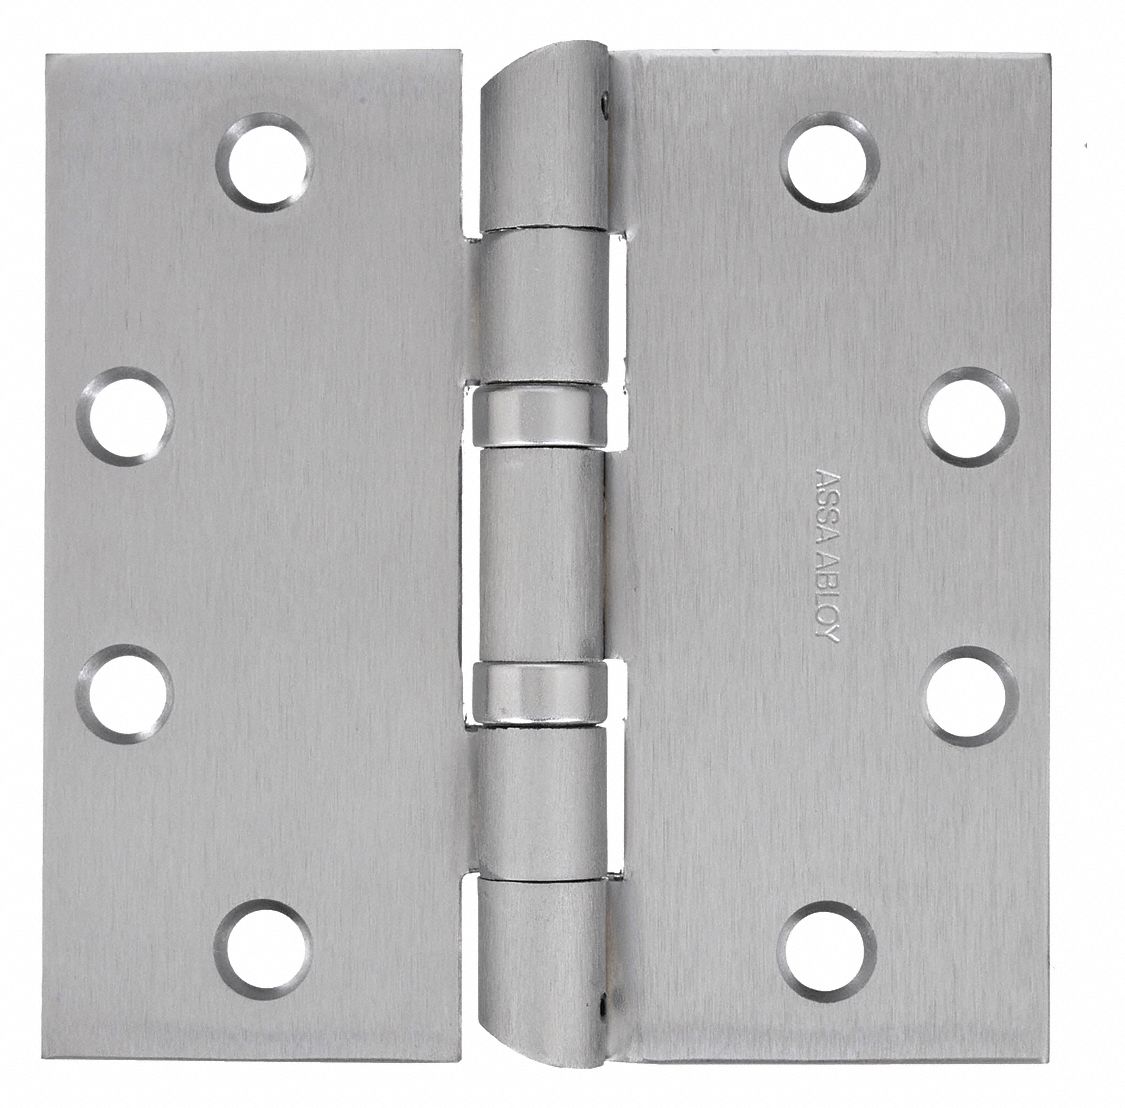 MCKINNEY HTA2714 4 1/2 X 4 1/2" 4 1/2 in x 2 1/4 in Butt Hinge with Dull Chrome Finish, Full Mortise Mounting, Square Corners